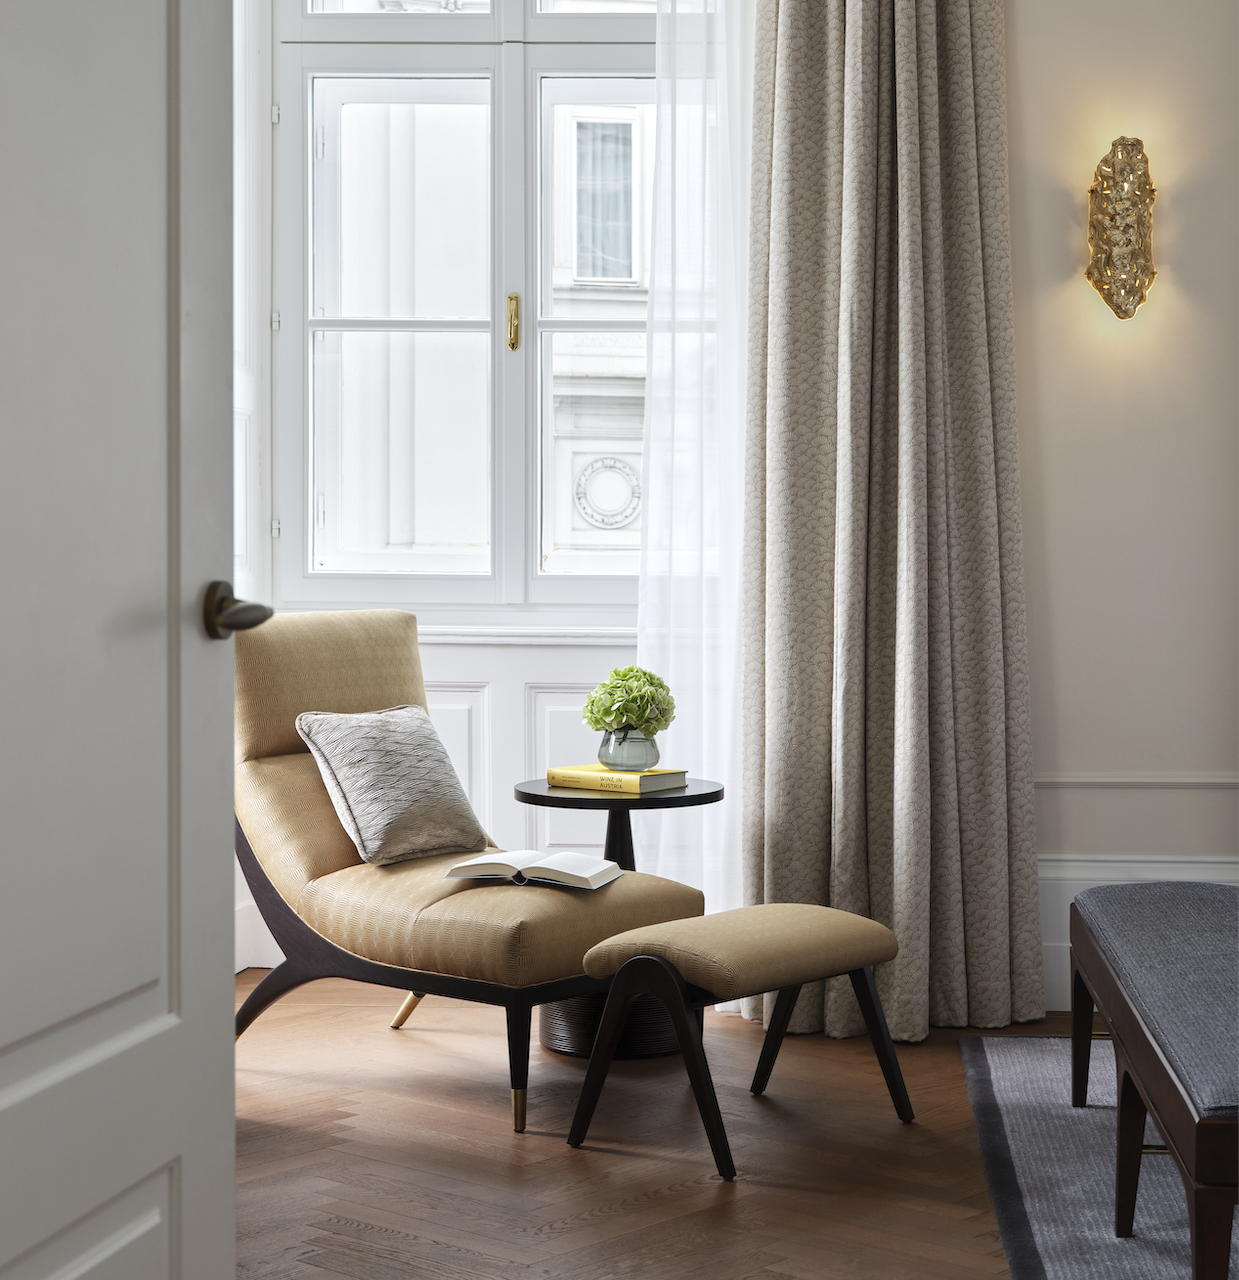 The luxurious Rosewood Vienna has opened on Petersplatz, one of the city's most famous squares.